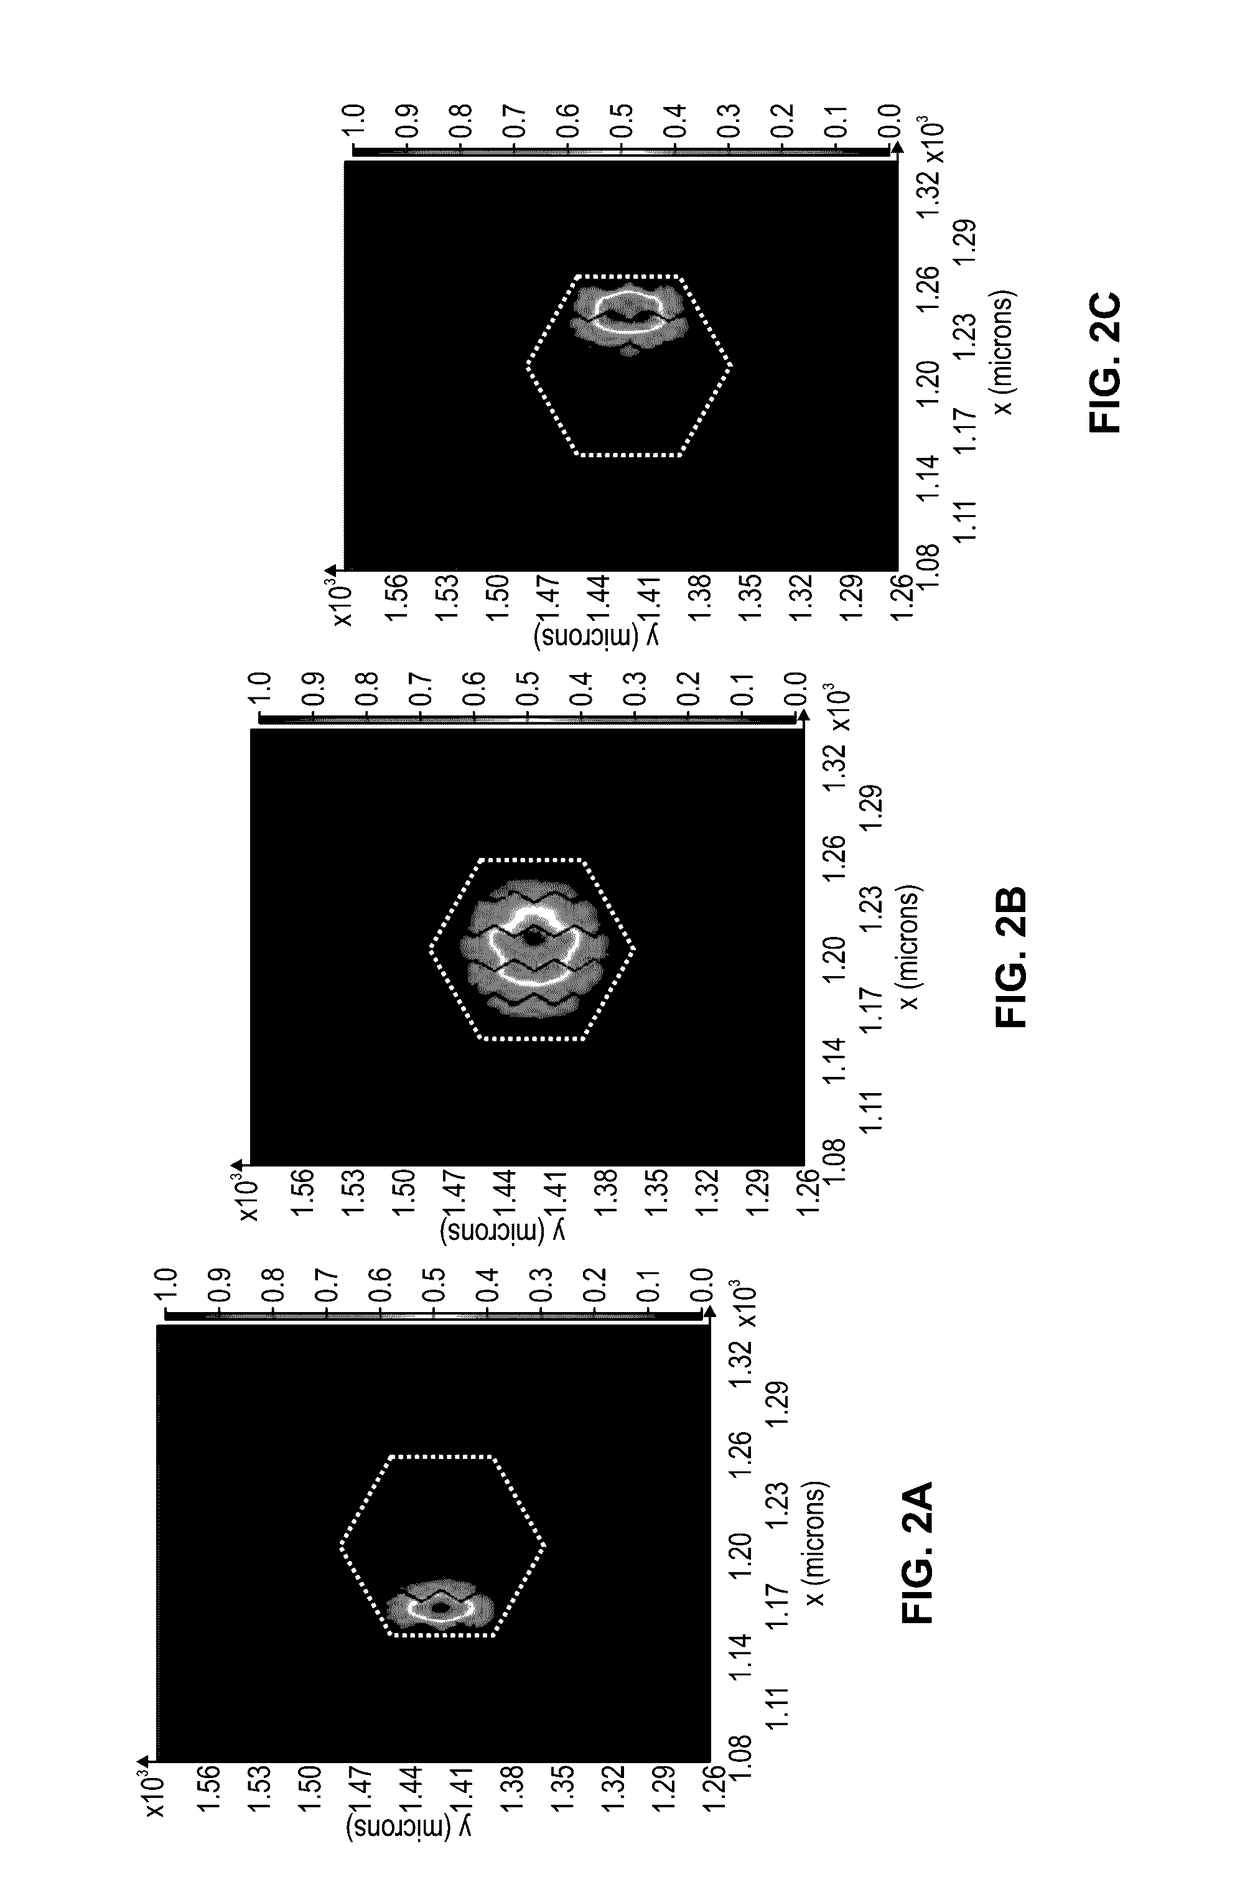 Method of fabrication of low-bend-loss single mode fibers of very large mode areas